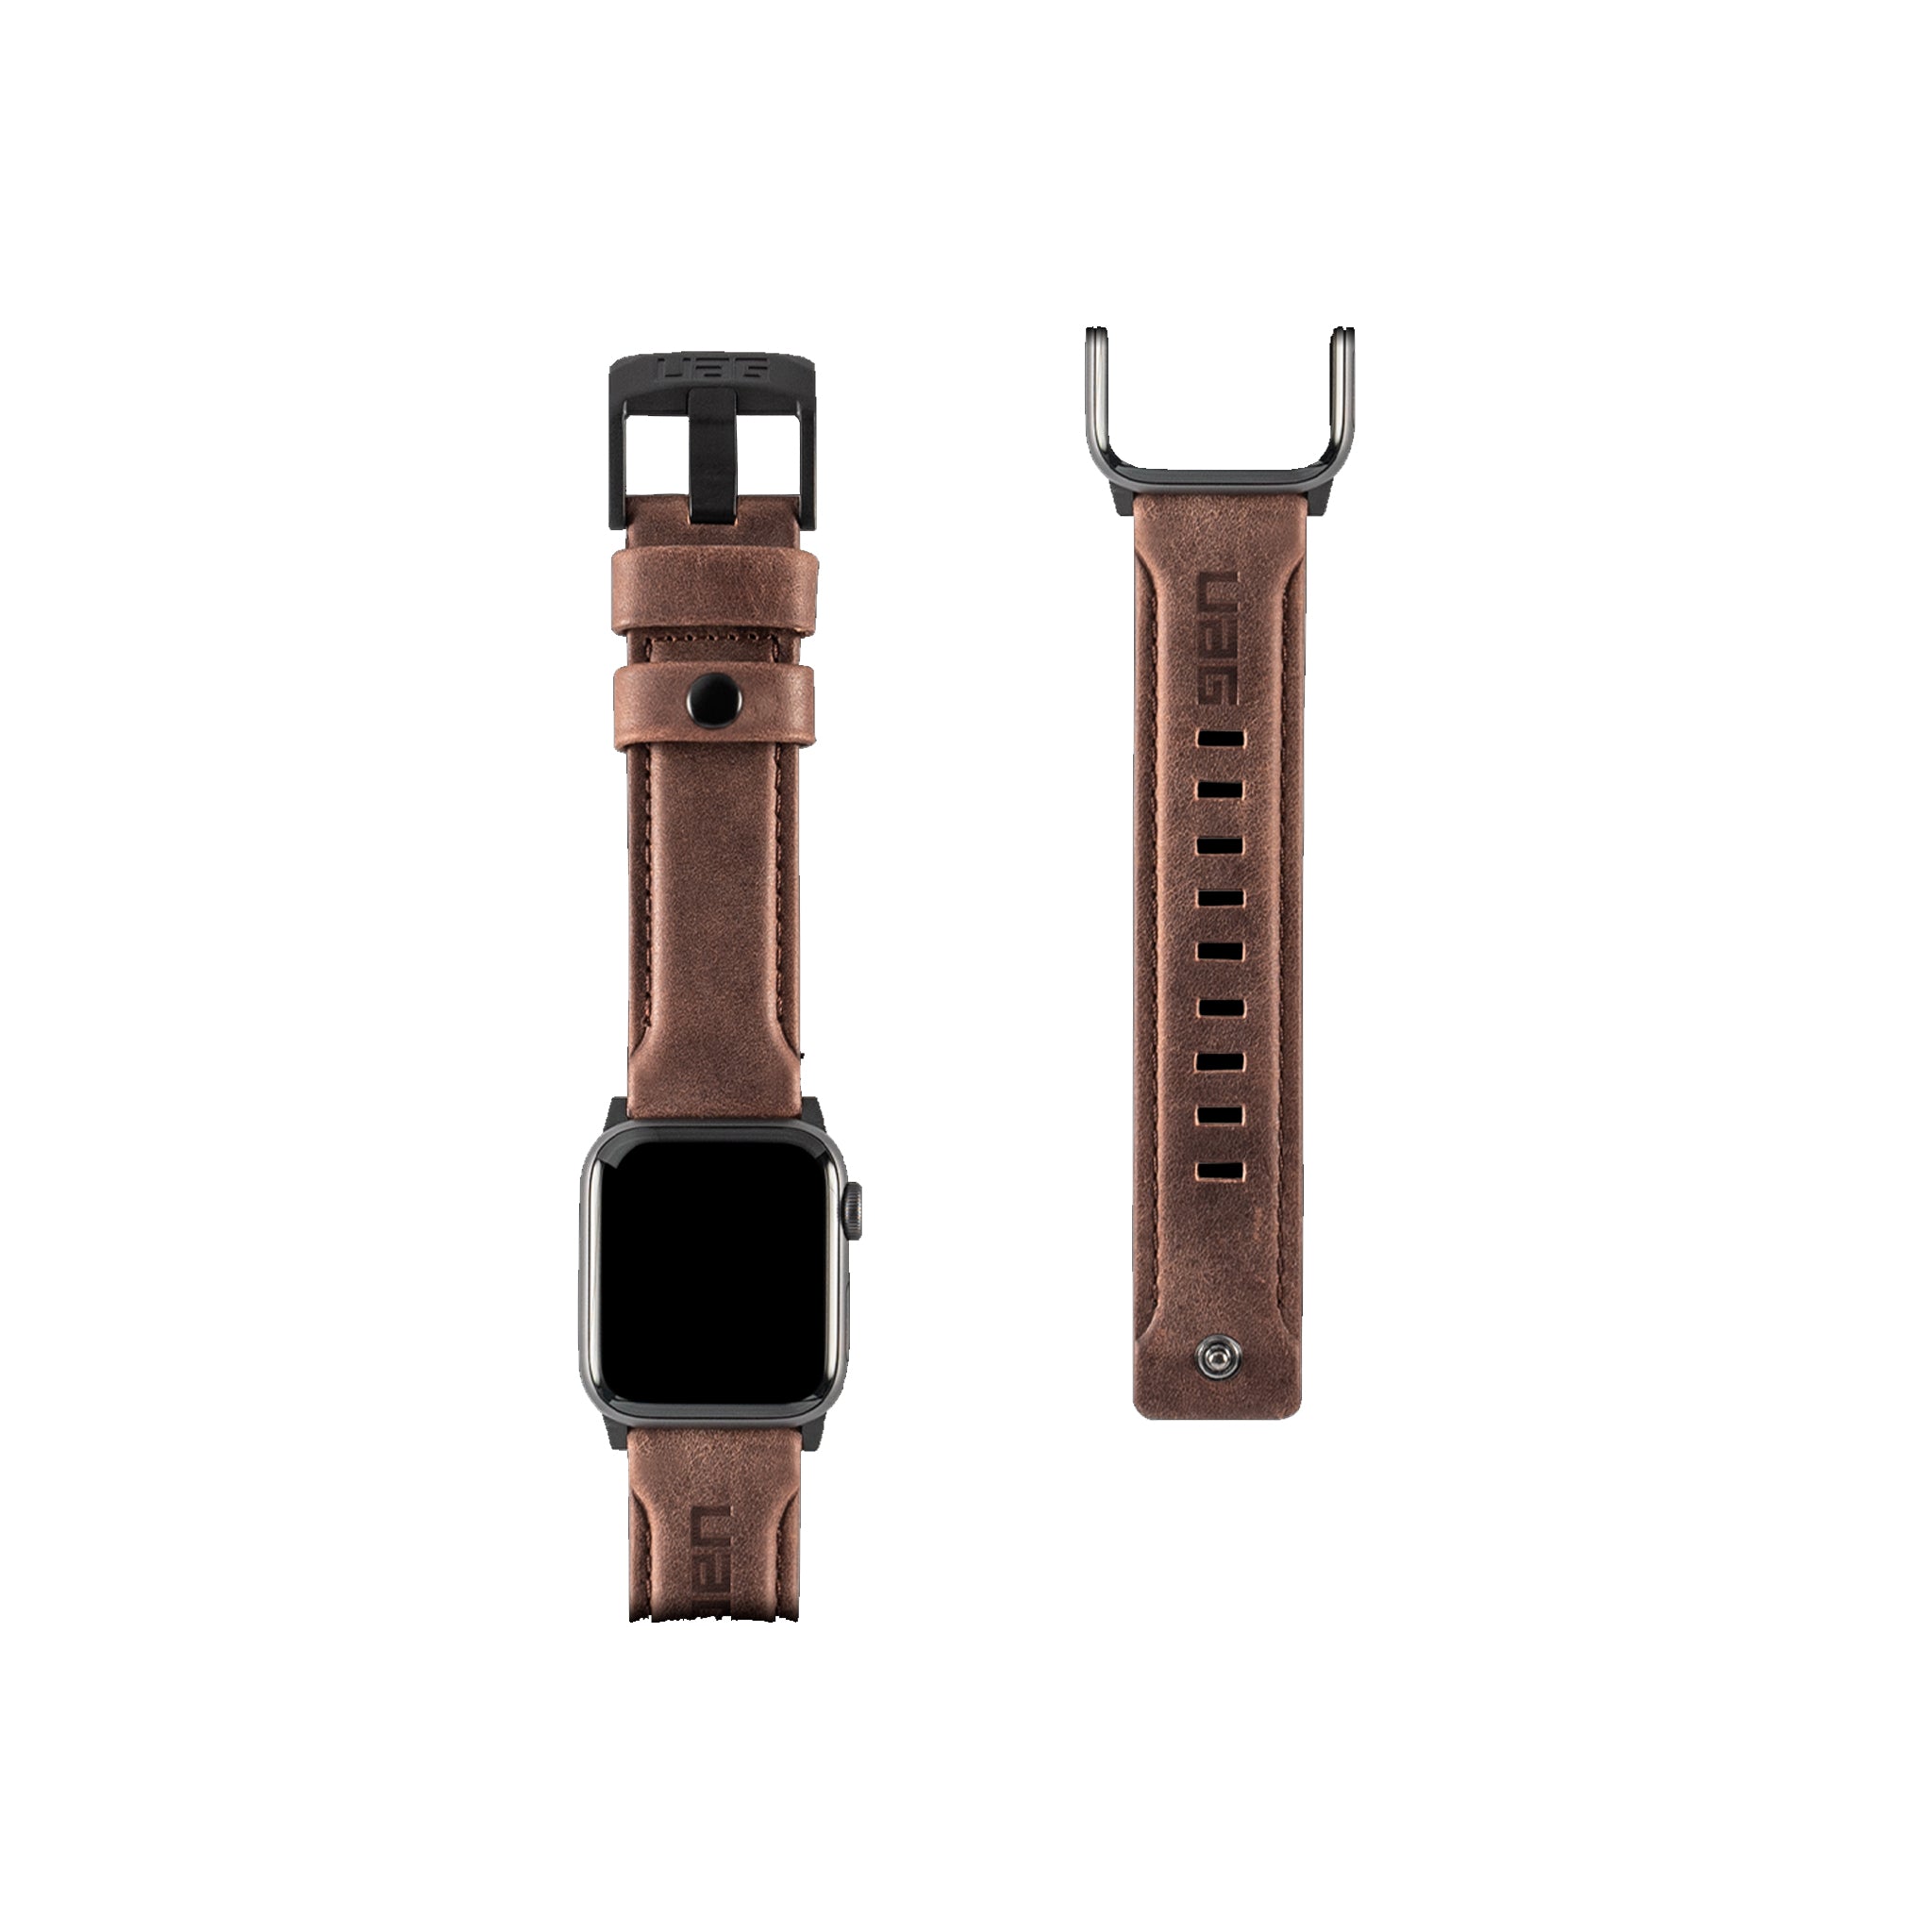 Urban Armor Gear (uag) - Leather Watchband For Apple Watch 40mm / 38mm - Brown